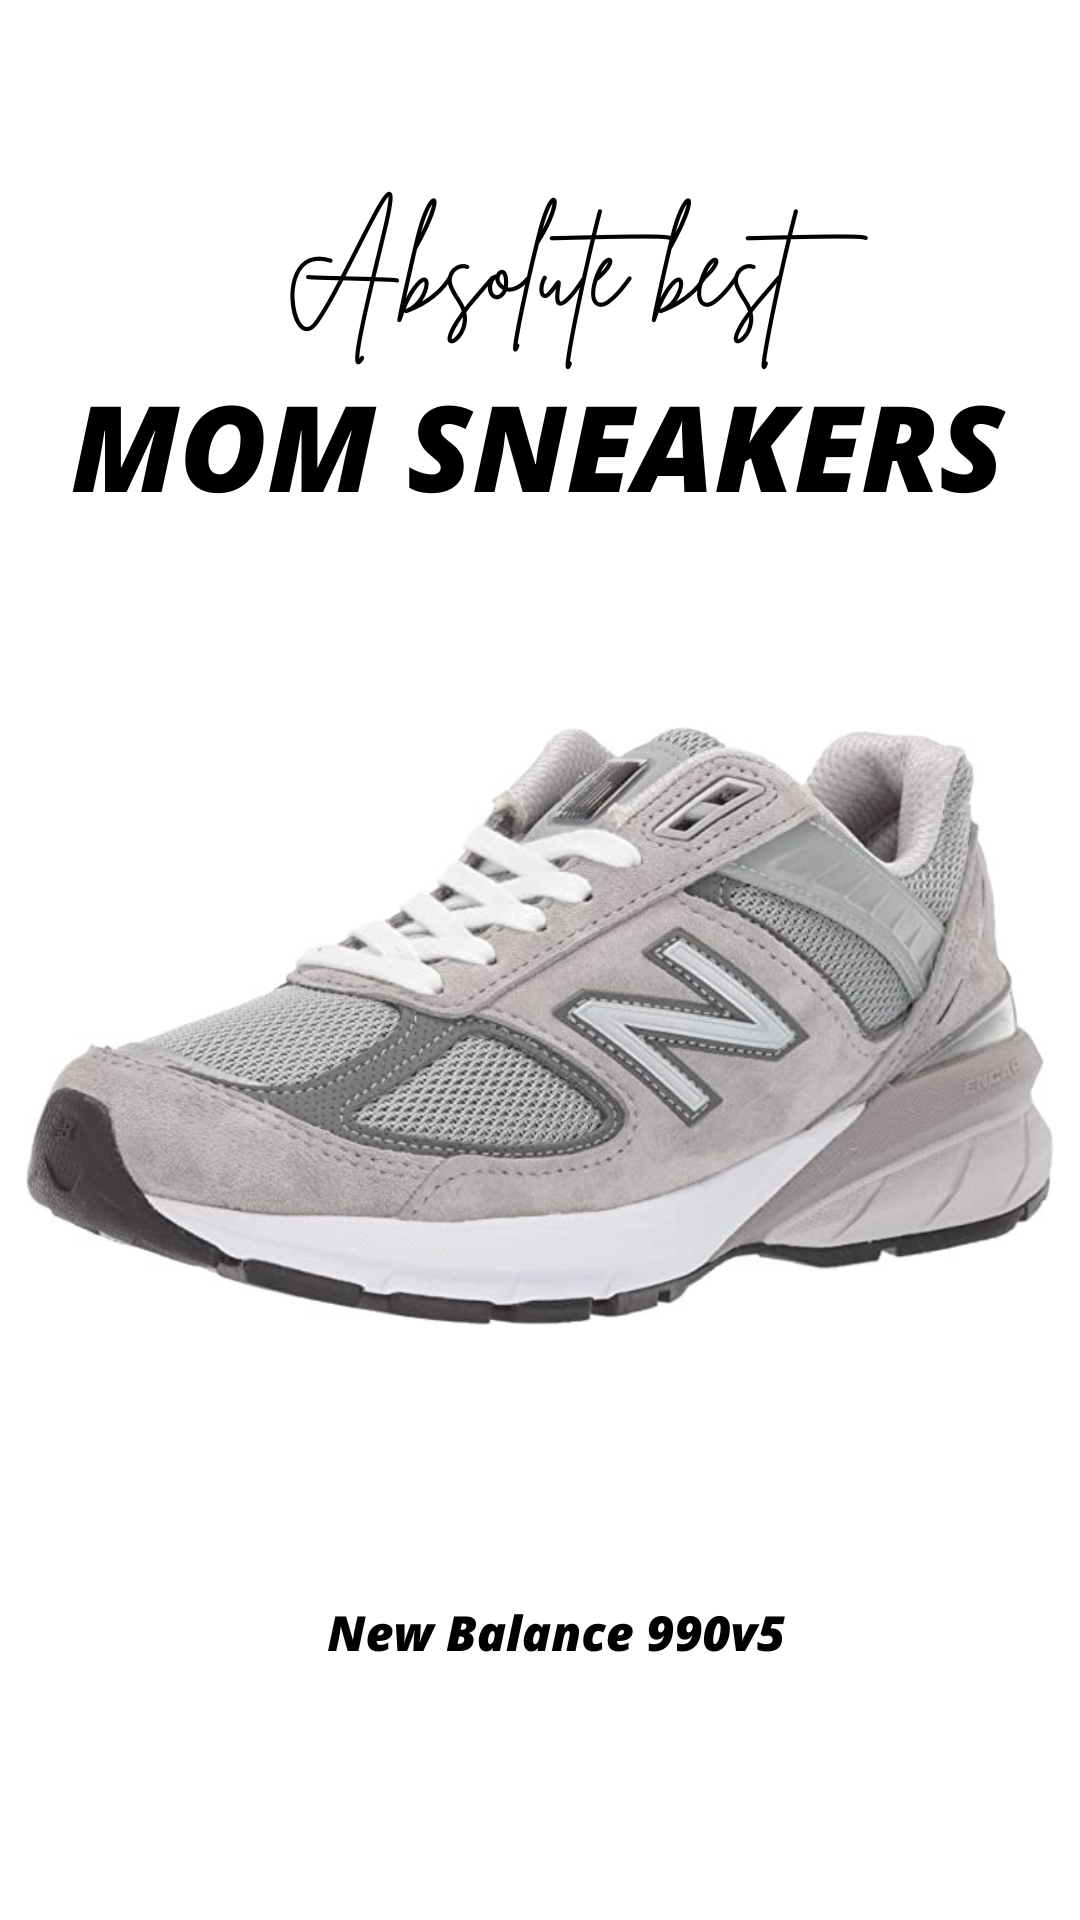 Why New Balance 990v5 Sneakers Are Every Mom’s Dream Come True